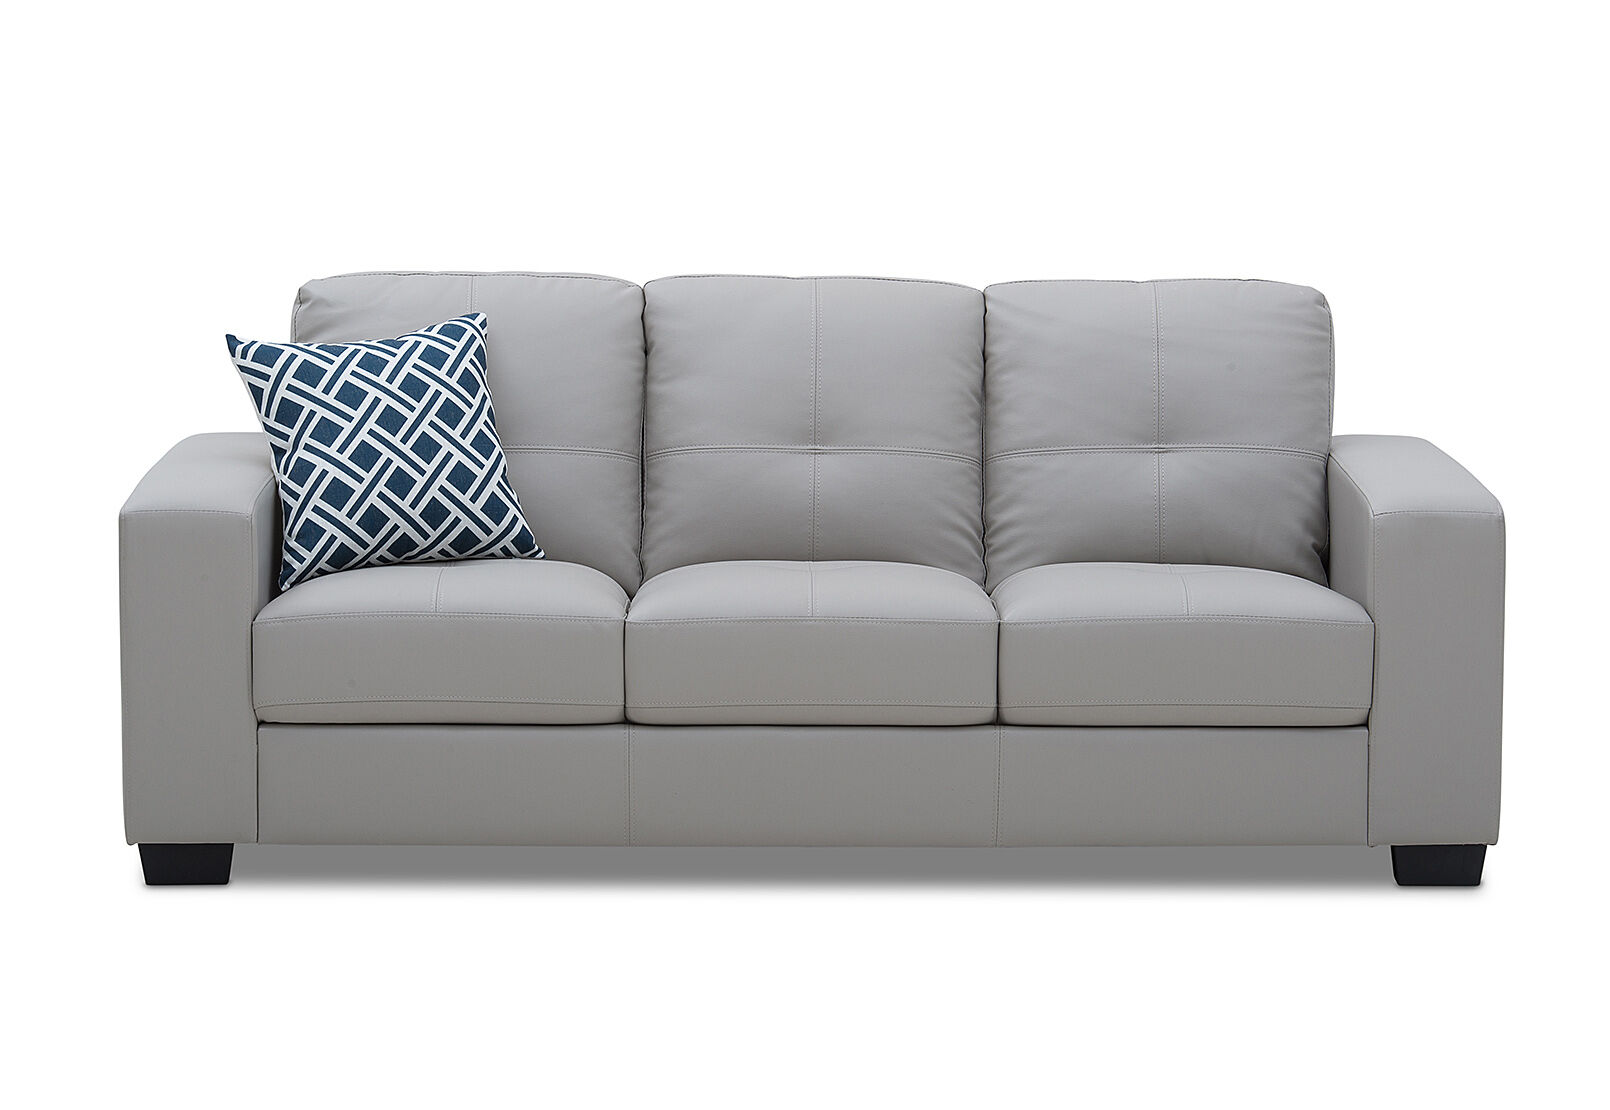 Bluebell Suppose Made a contract Amart 3 Seater Sofa on Sale, SAVE 50%.